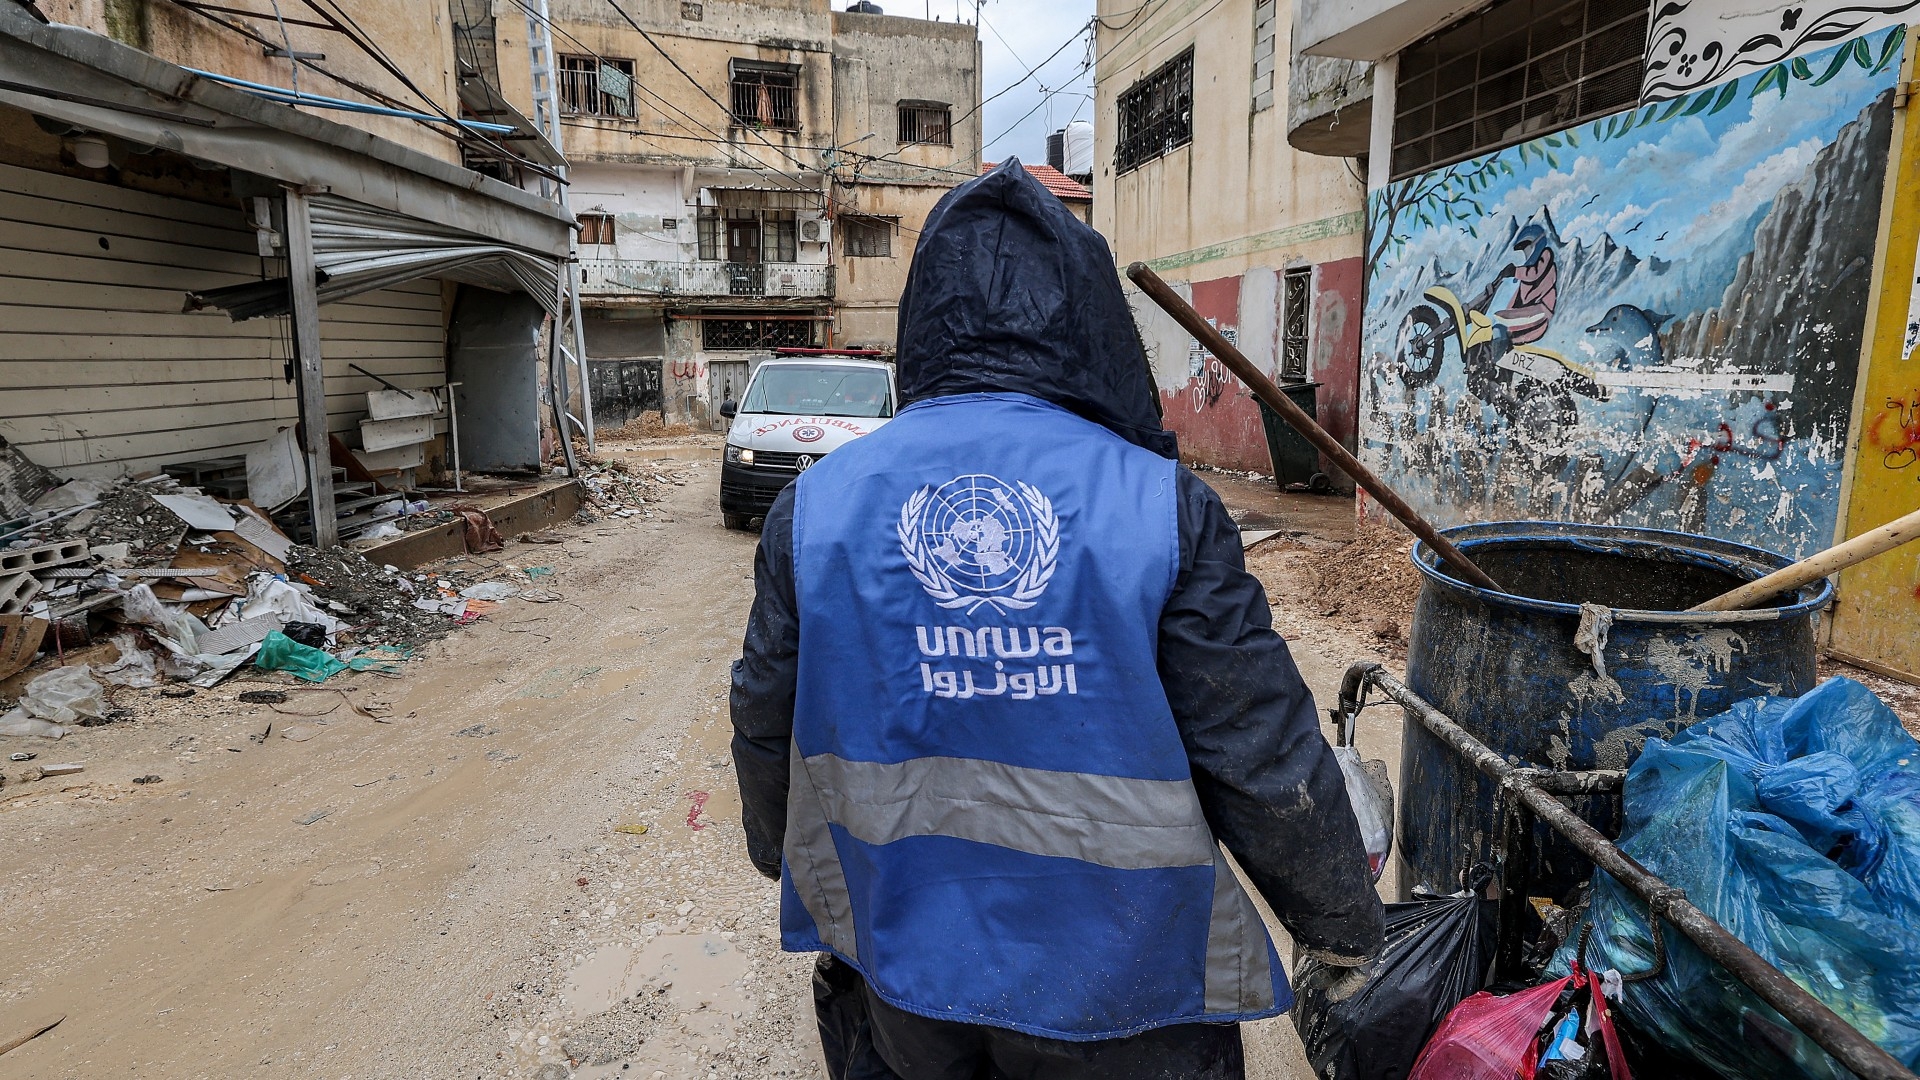 A man wearing a jacket bearing the logo of the United Nations Relief and Works Agency for Palestine Refugees in the Near East (Unrwa), in the city of Jenin in the occupied West Bank on 30 January 2024 (AFP/Jaafar Ashtiyeh)